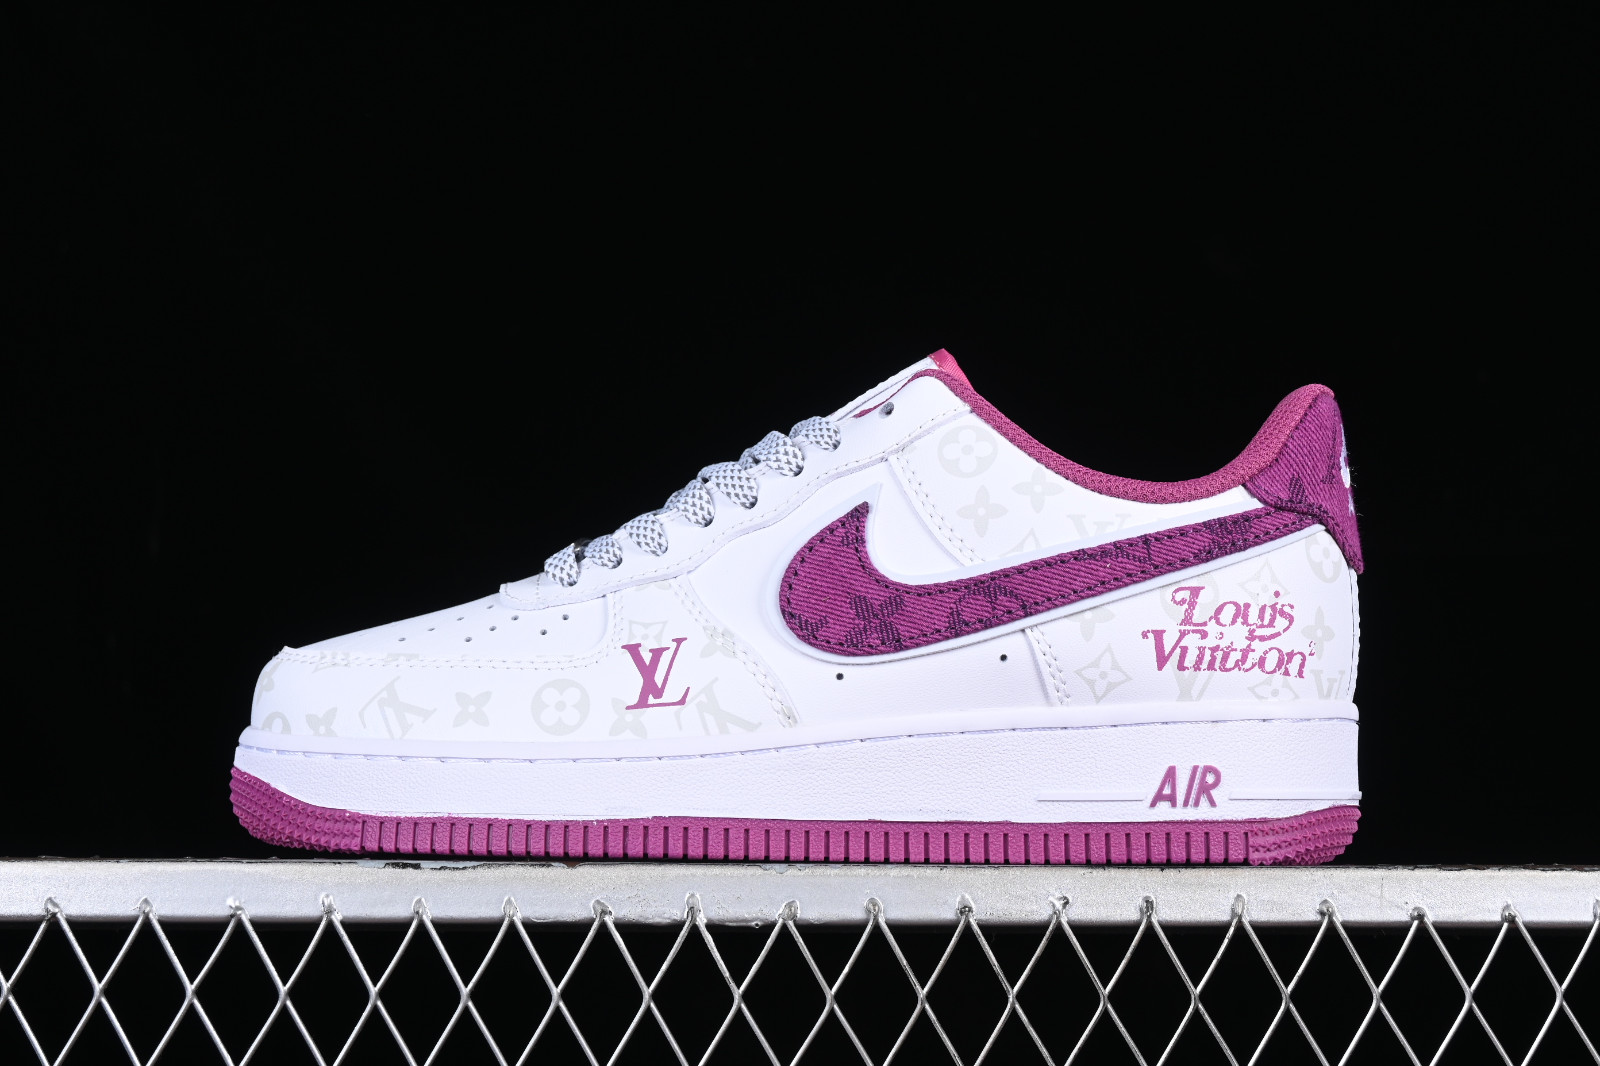 Nike outlet Air Force 1 07 Low LV Purple Grey CV0670 - GmarShops - 500 - air force 1 neptune green